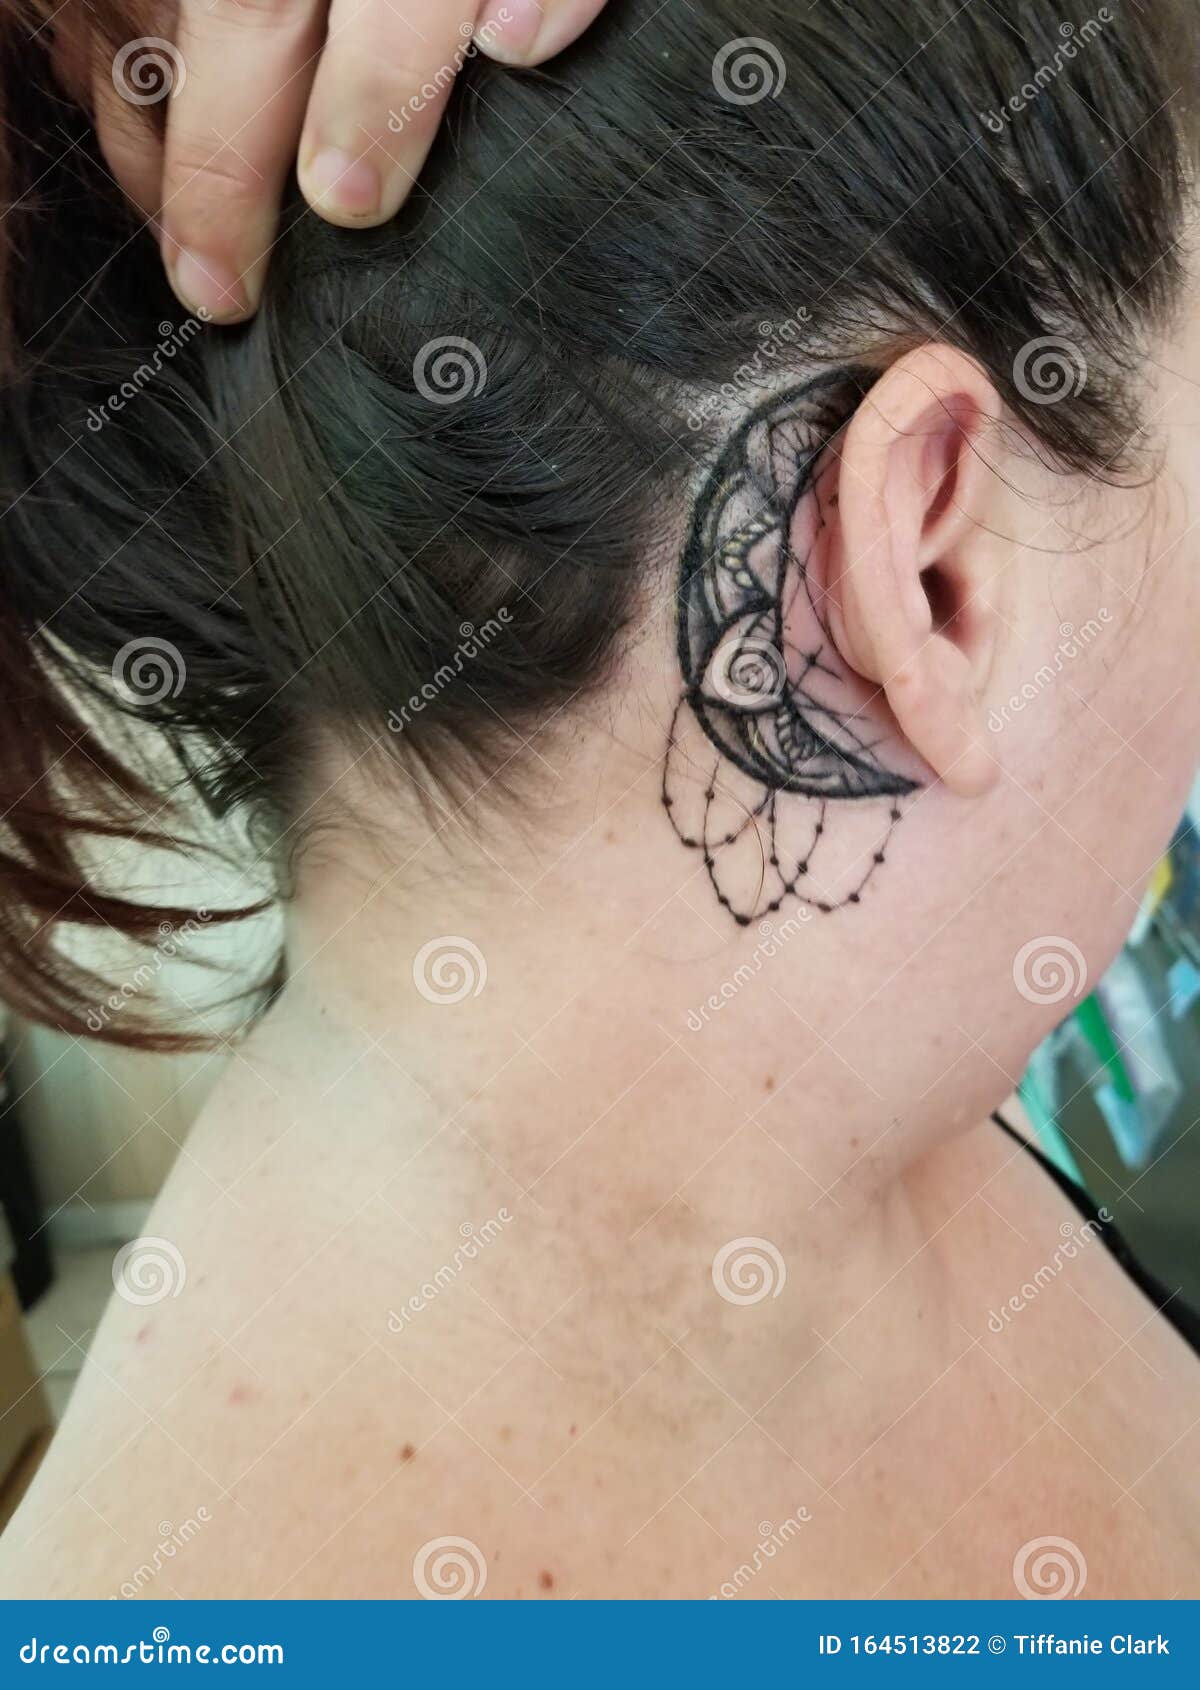 Crescent moon tattoo done behind the ear minimalistic